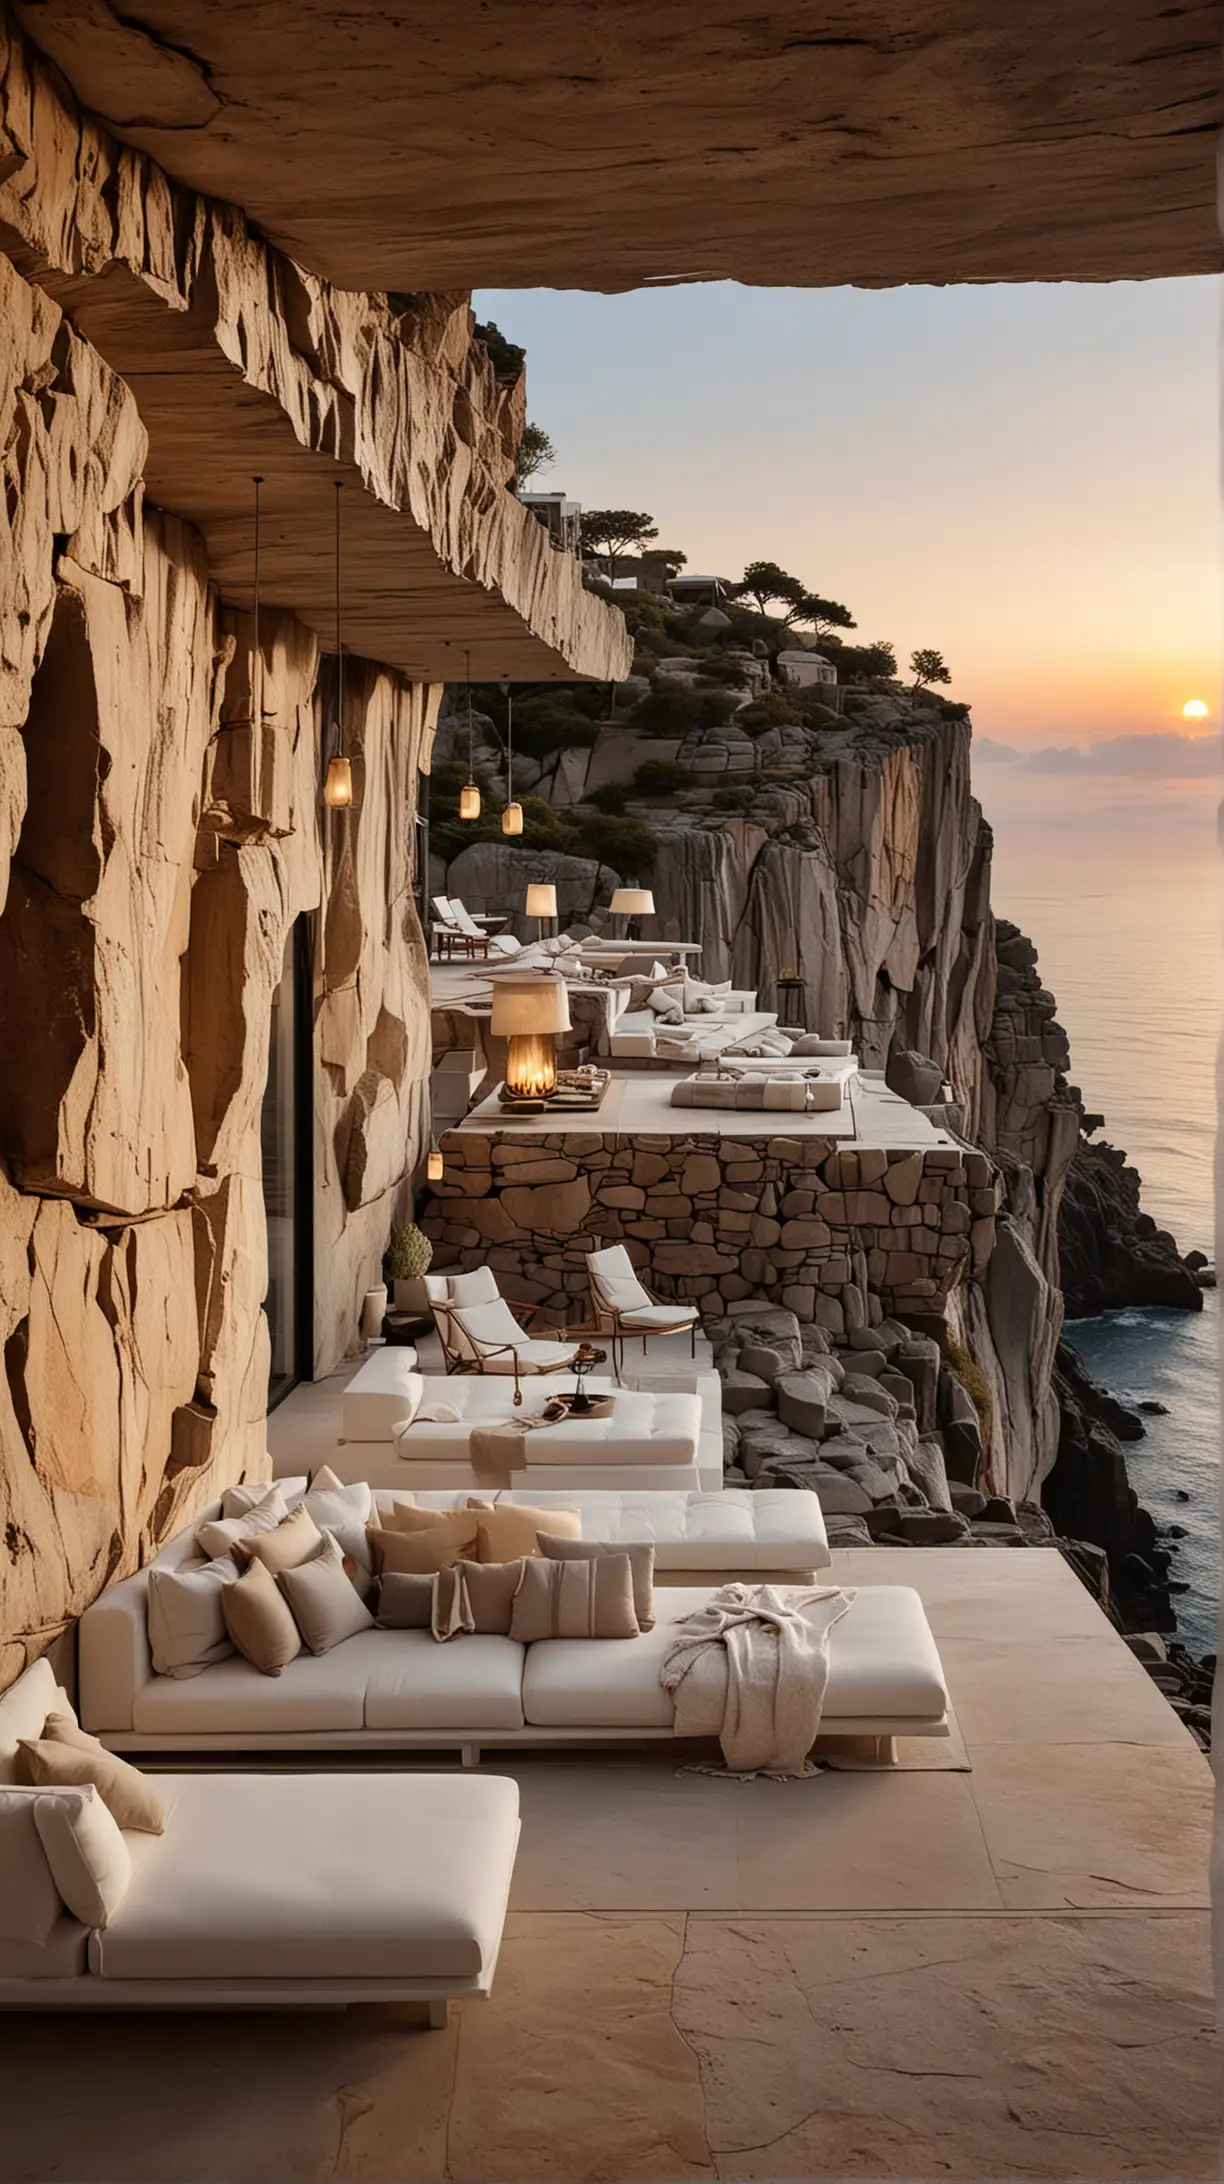 "A minimalistic cliffside villa interior, integrated into a rugged rock formation. Clean lines, modern white furniture, hanging lanterns, and floor-to-ceiling windows showcasing a breathtaking sunset. Soft, natural lighting emphasizing the rocky textures. Calm, elegant, and minimalist ambiance."